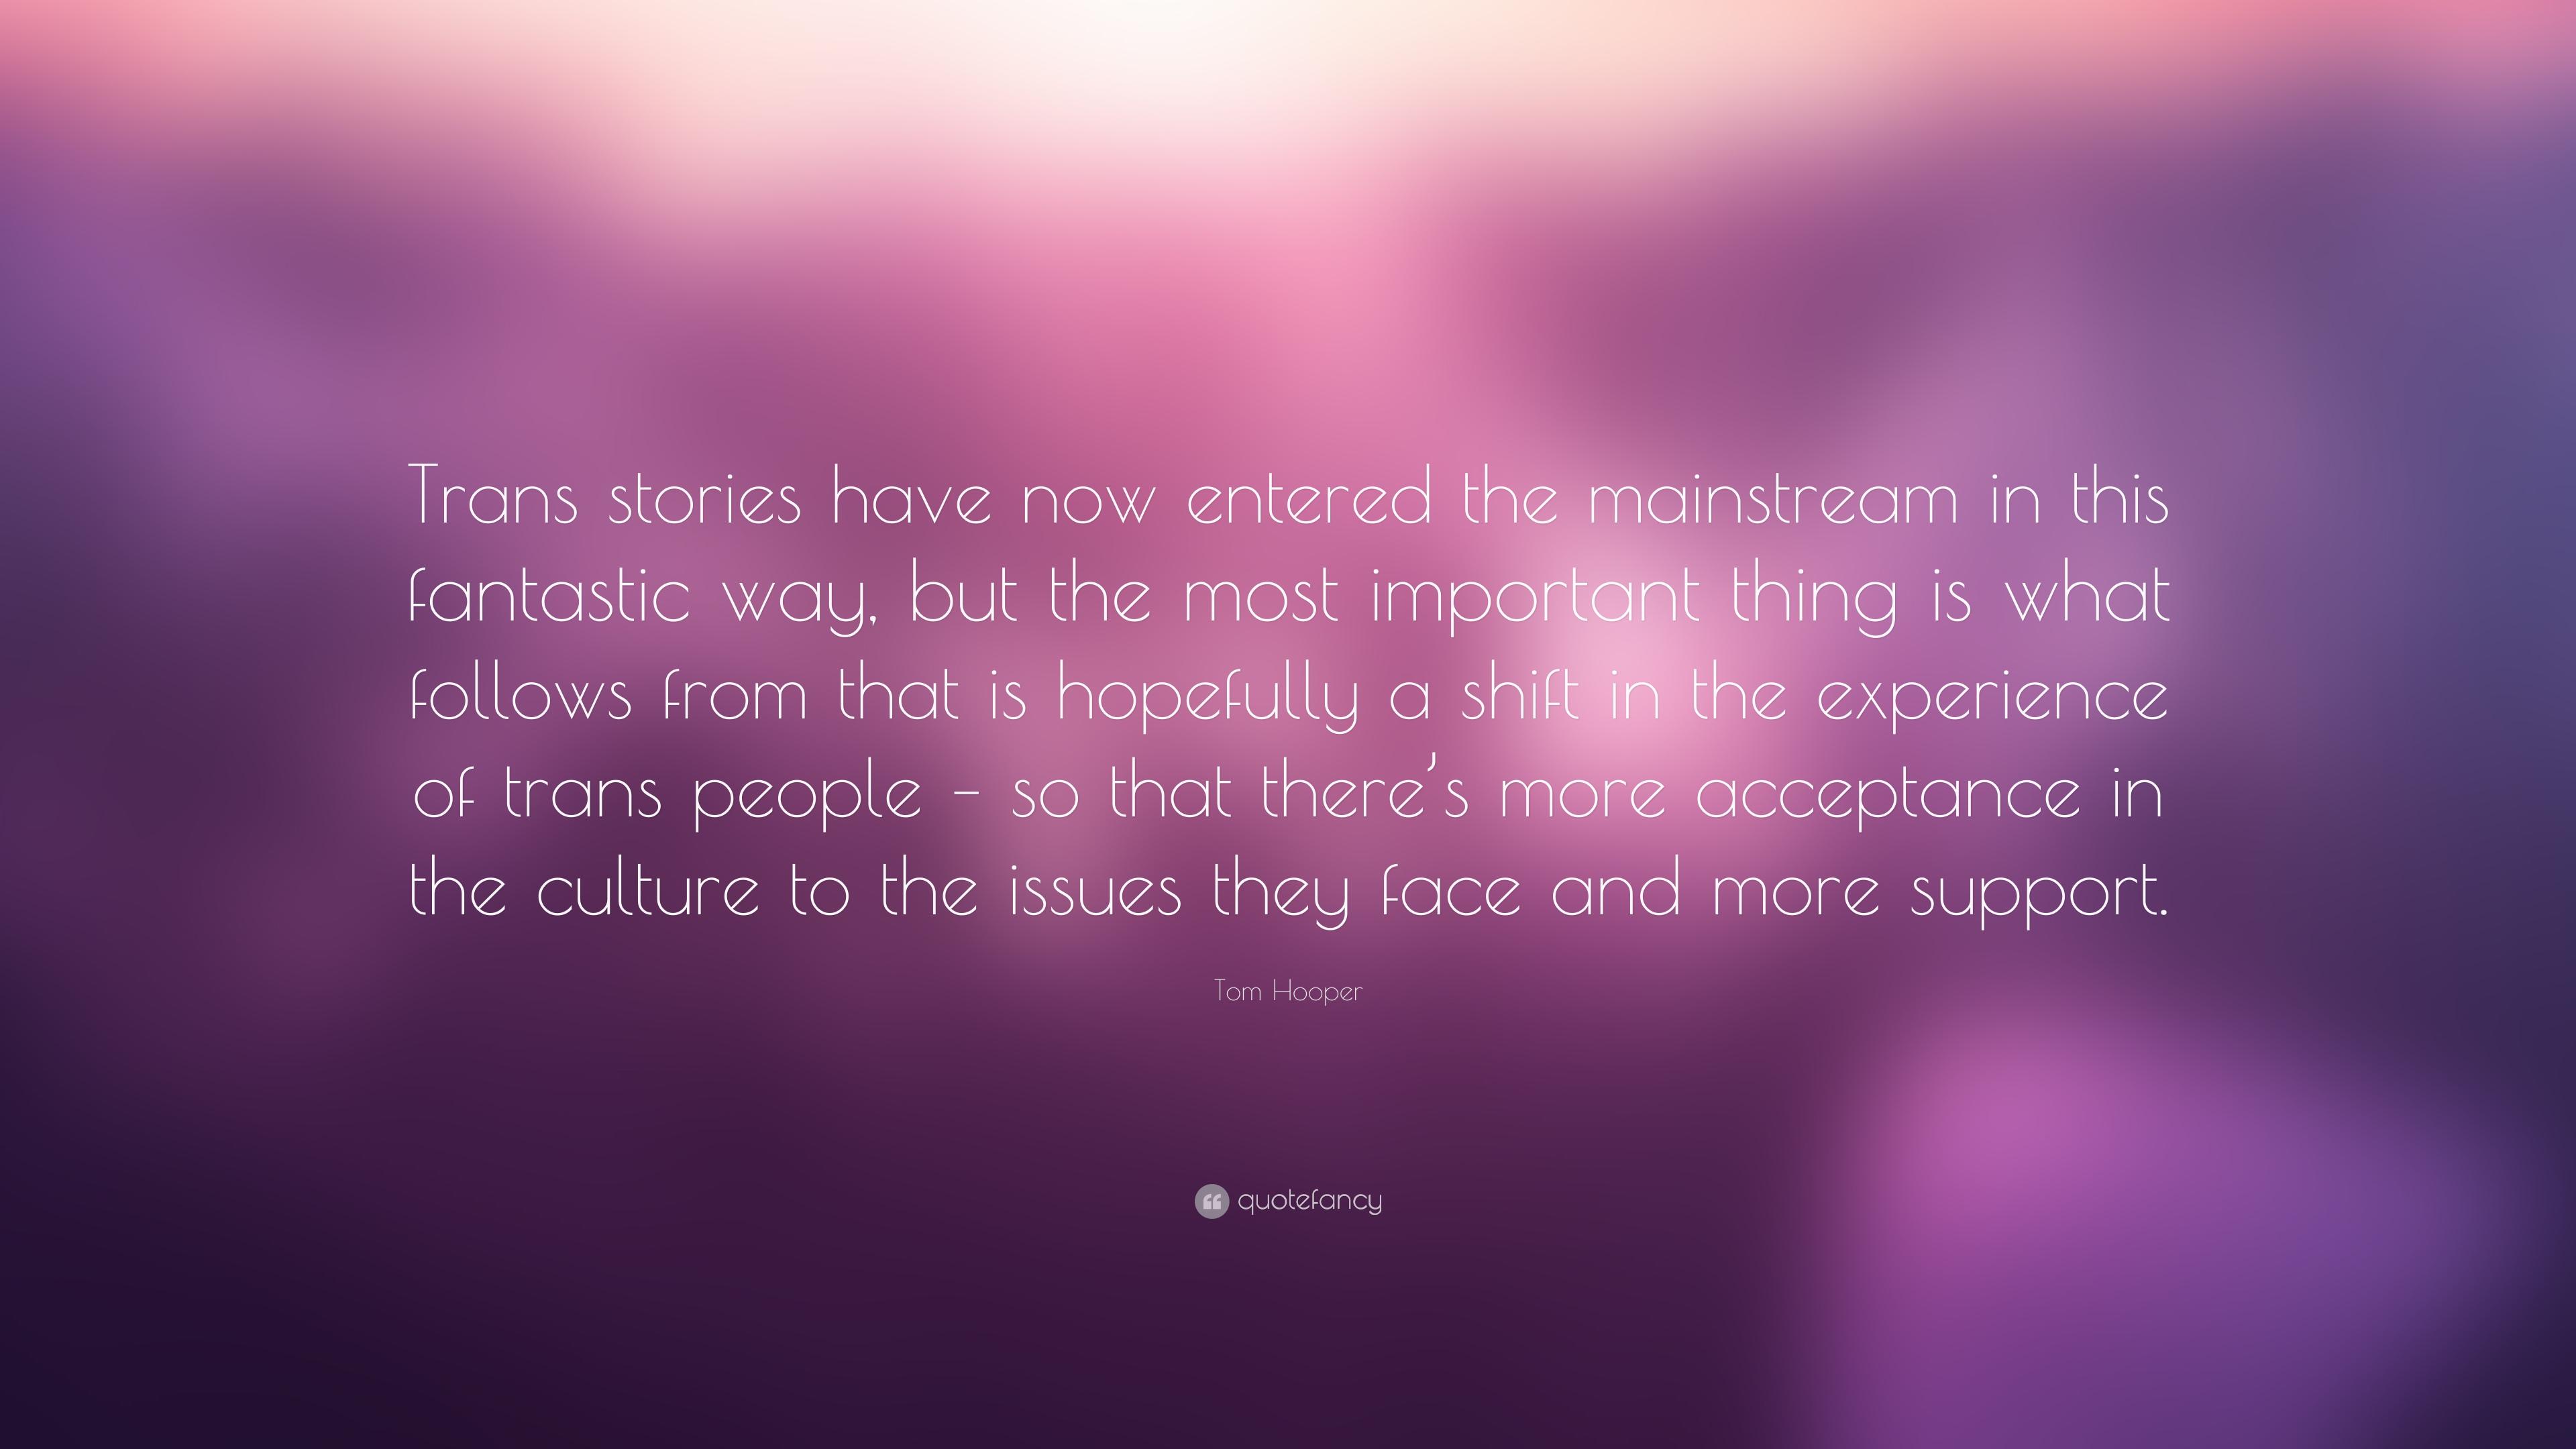 Tom Hooper Quote: “Trans stories have now entered the mainstream